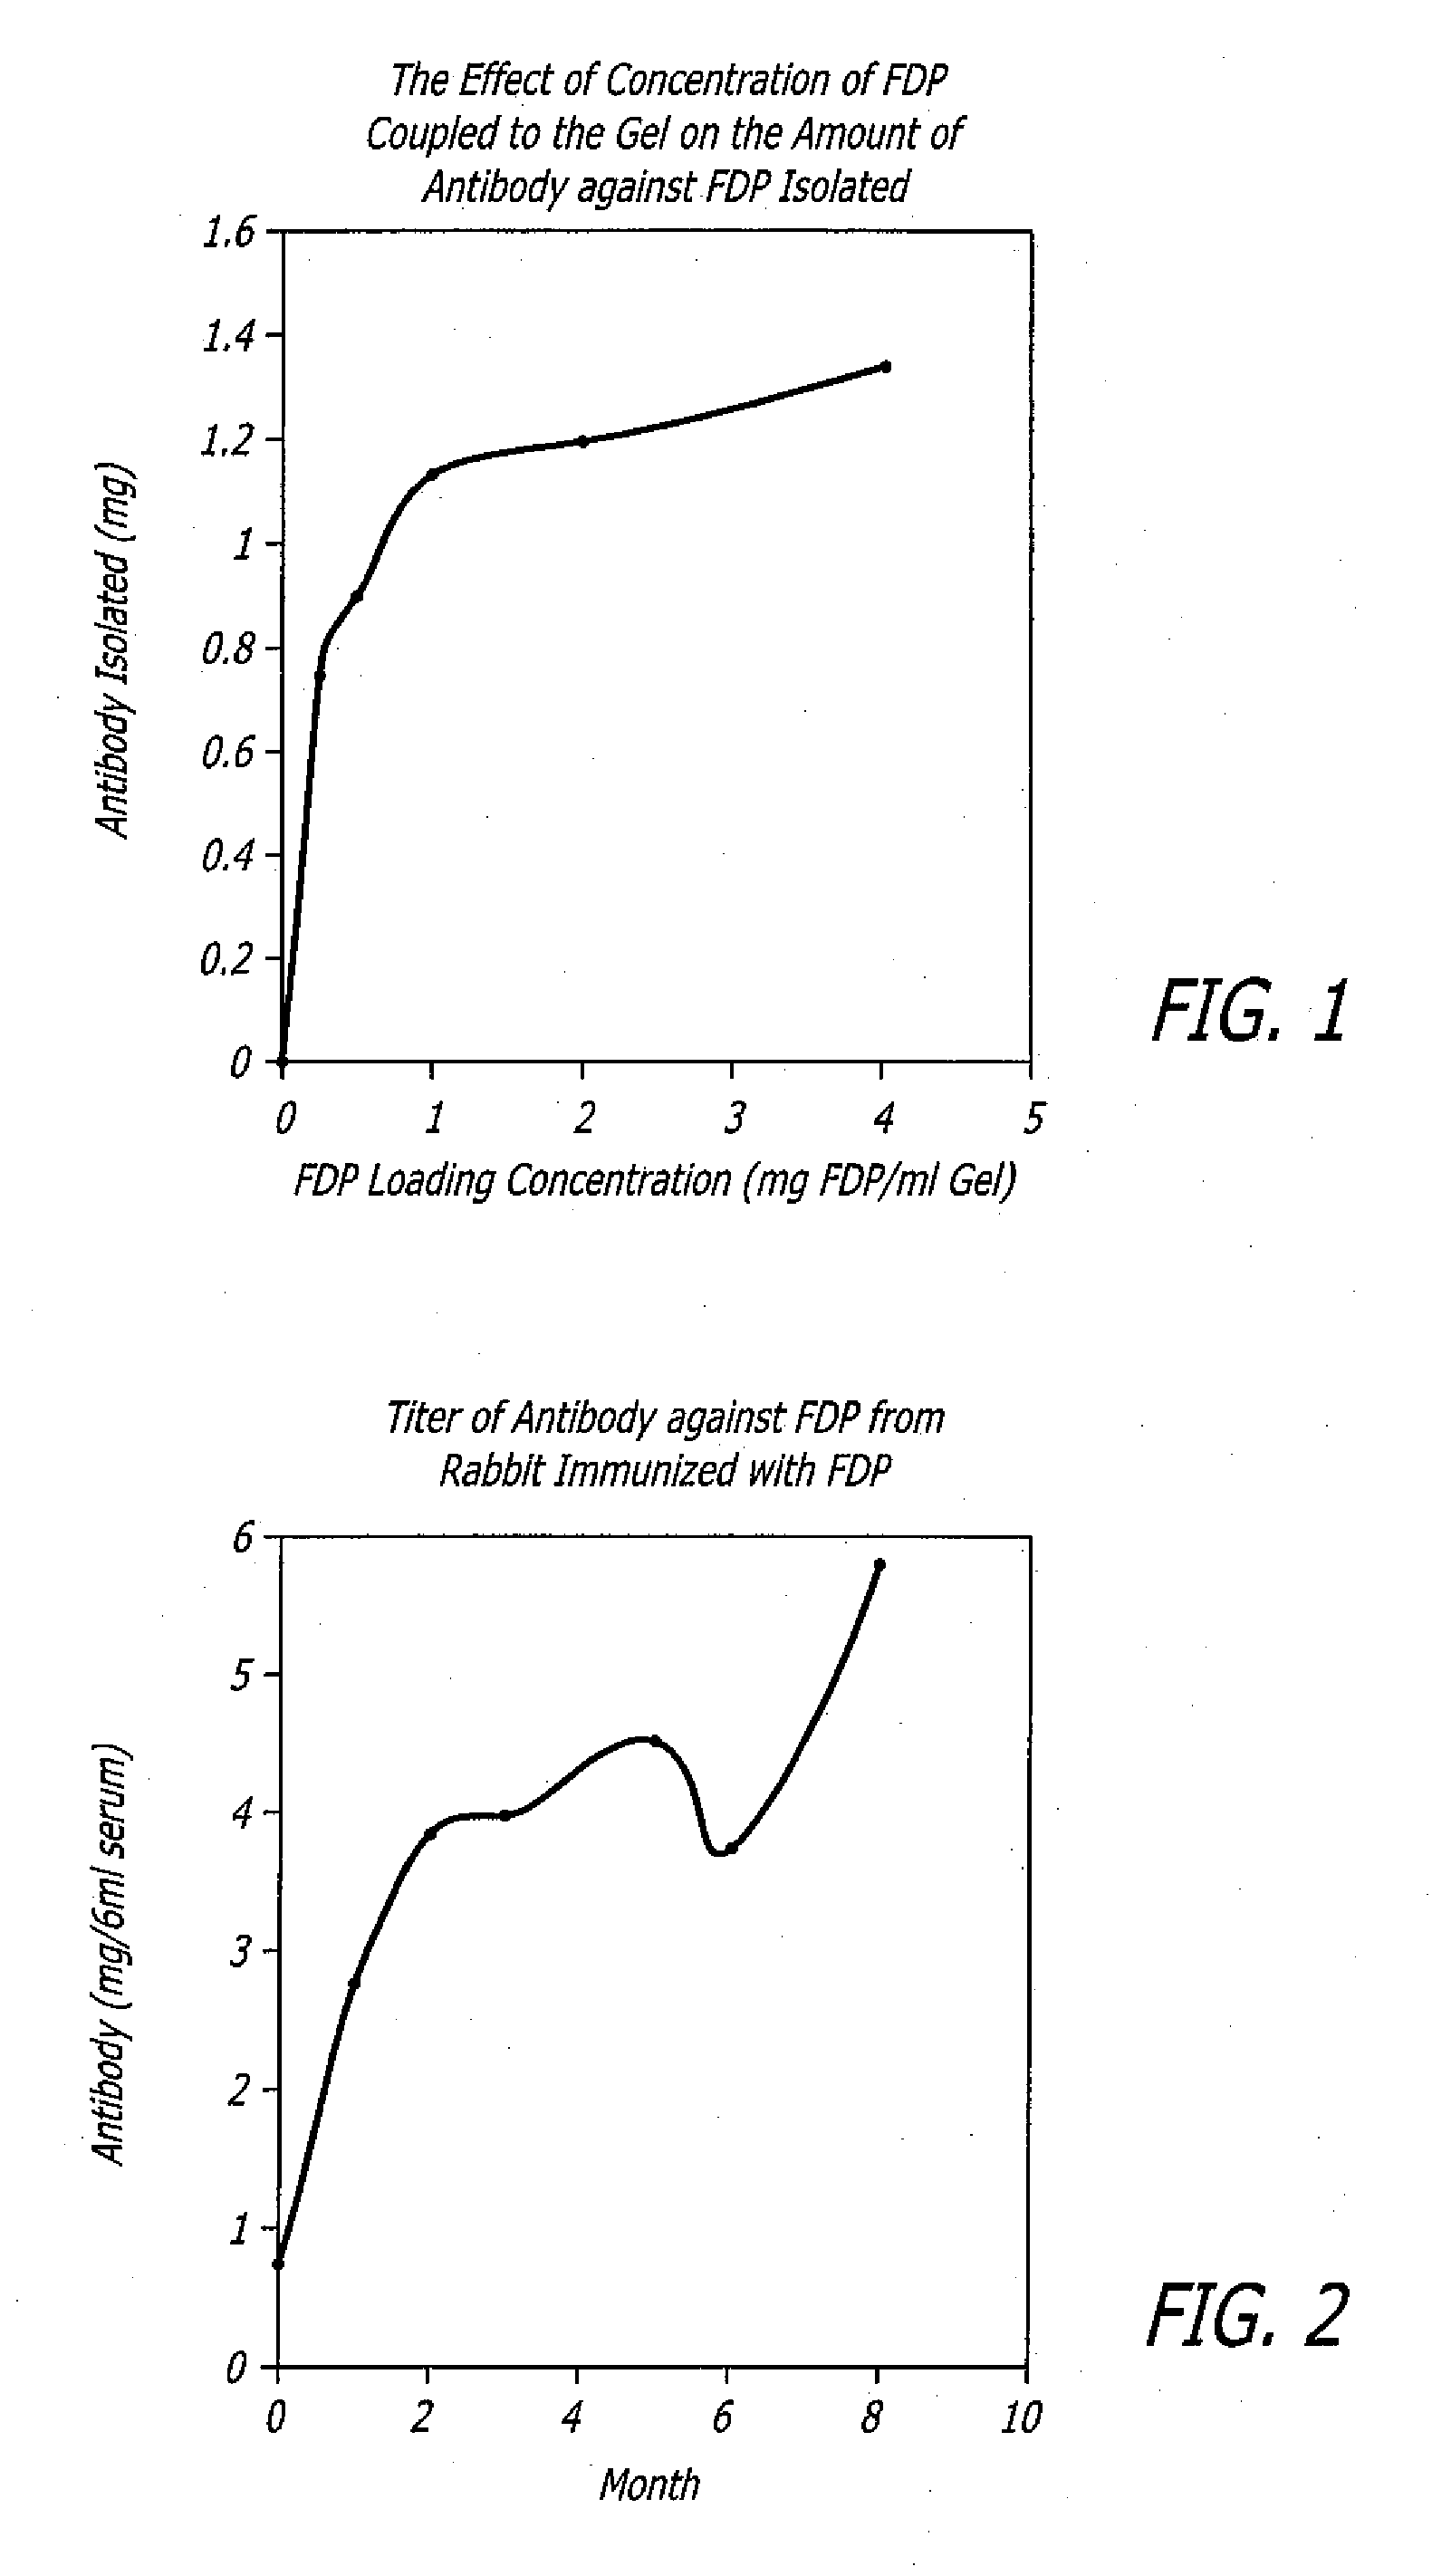 Polyclonal antibodies against fibrinogen degradation products and associated methods of production and use